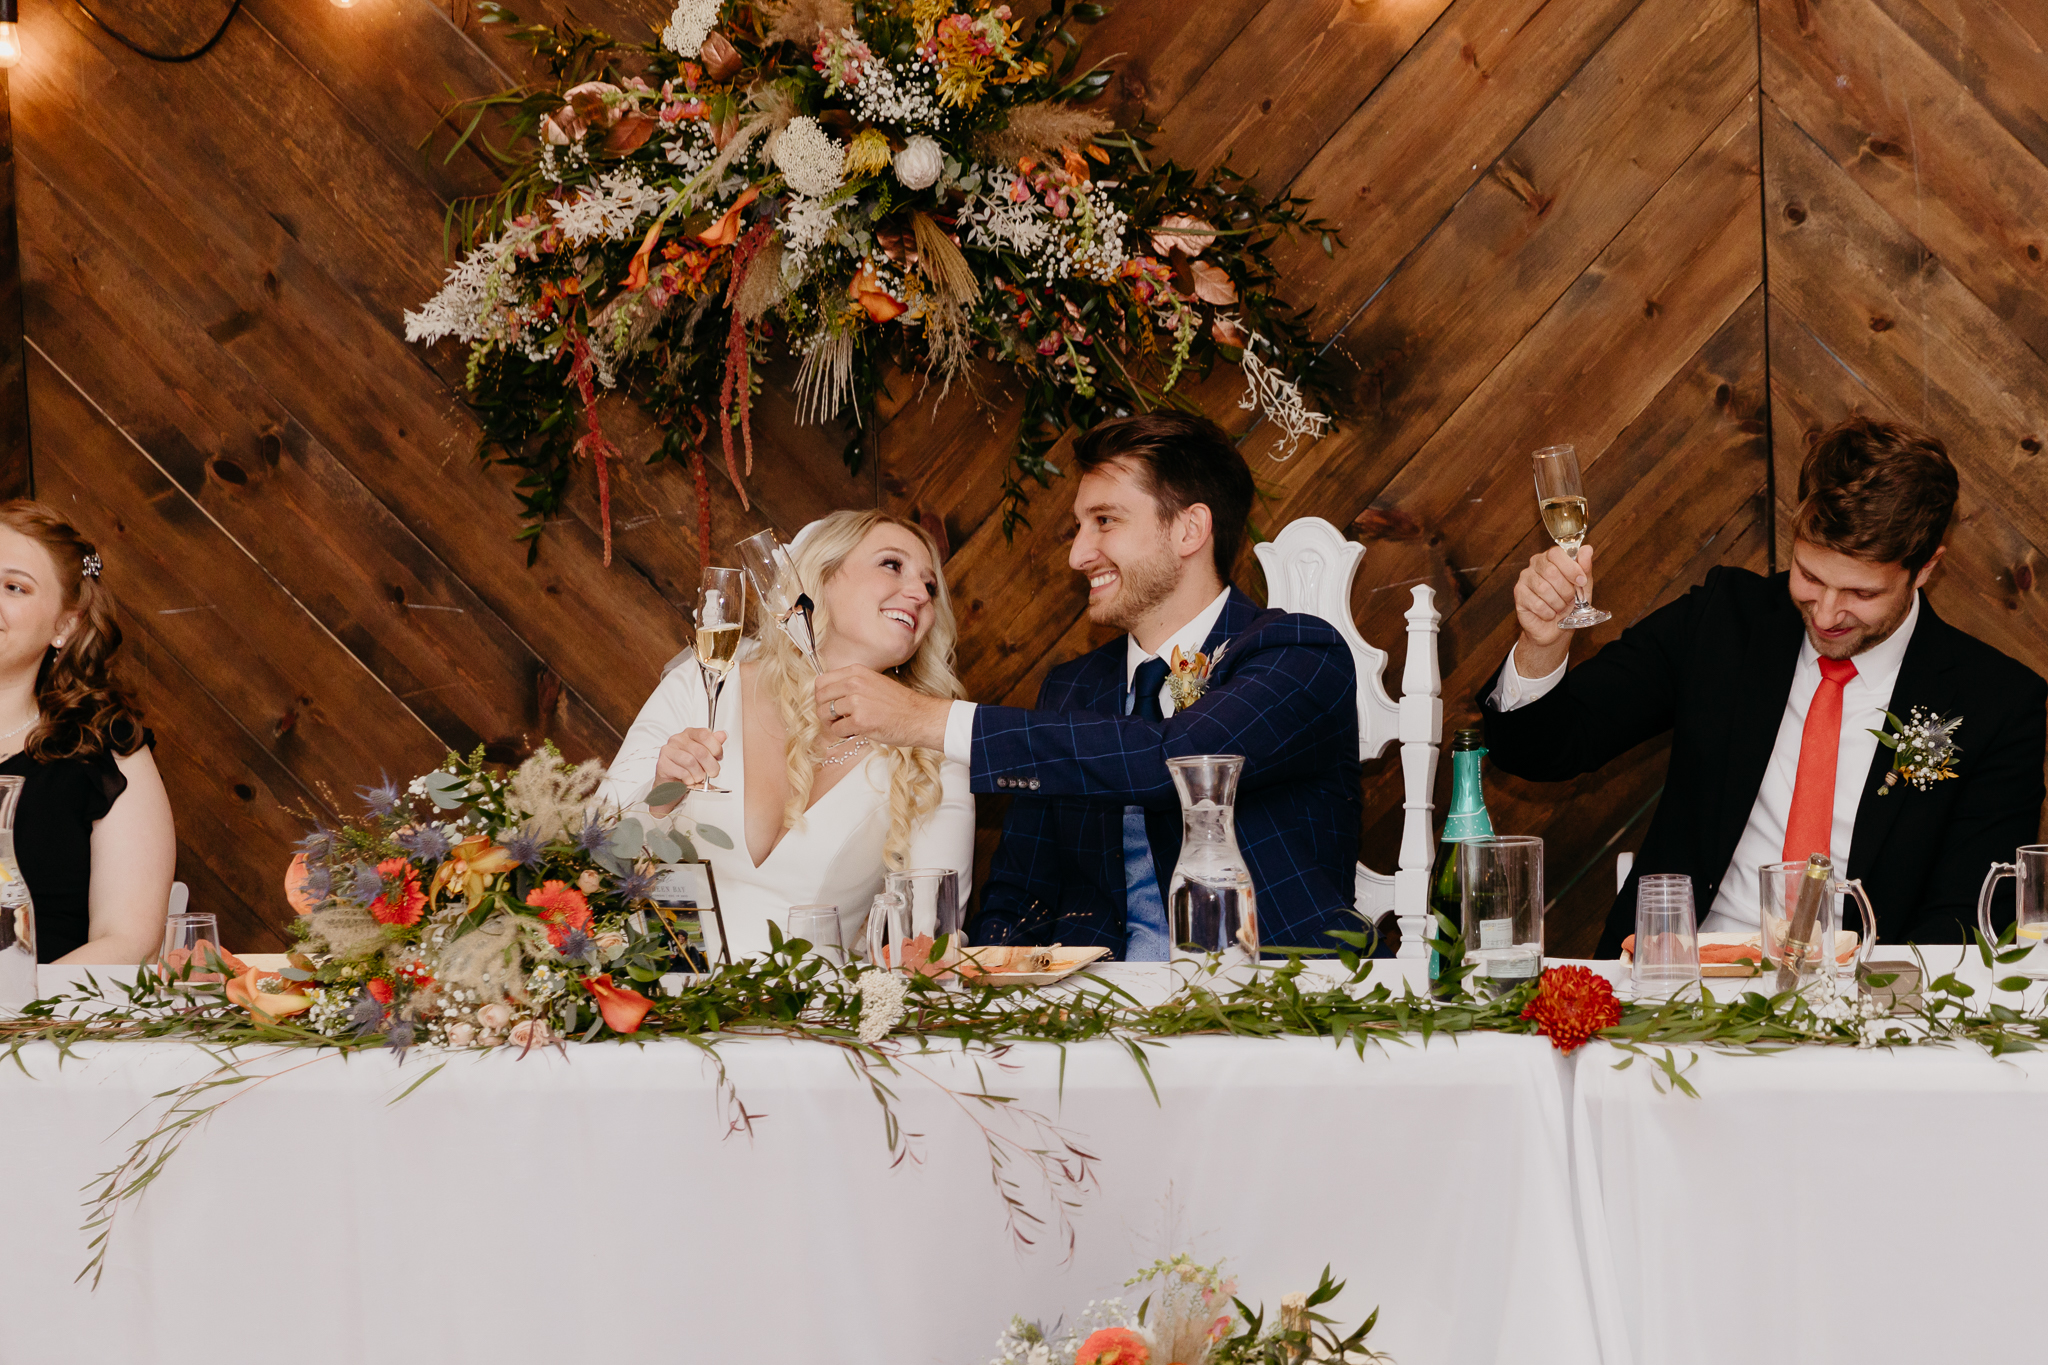 Bride and groom smile at each other at sitting at a table with flowers and food